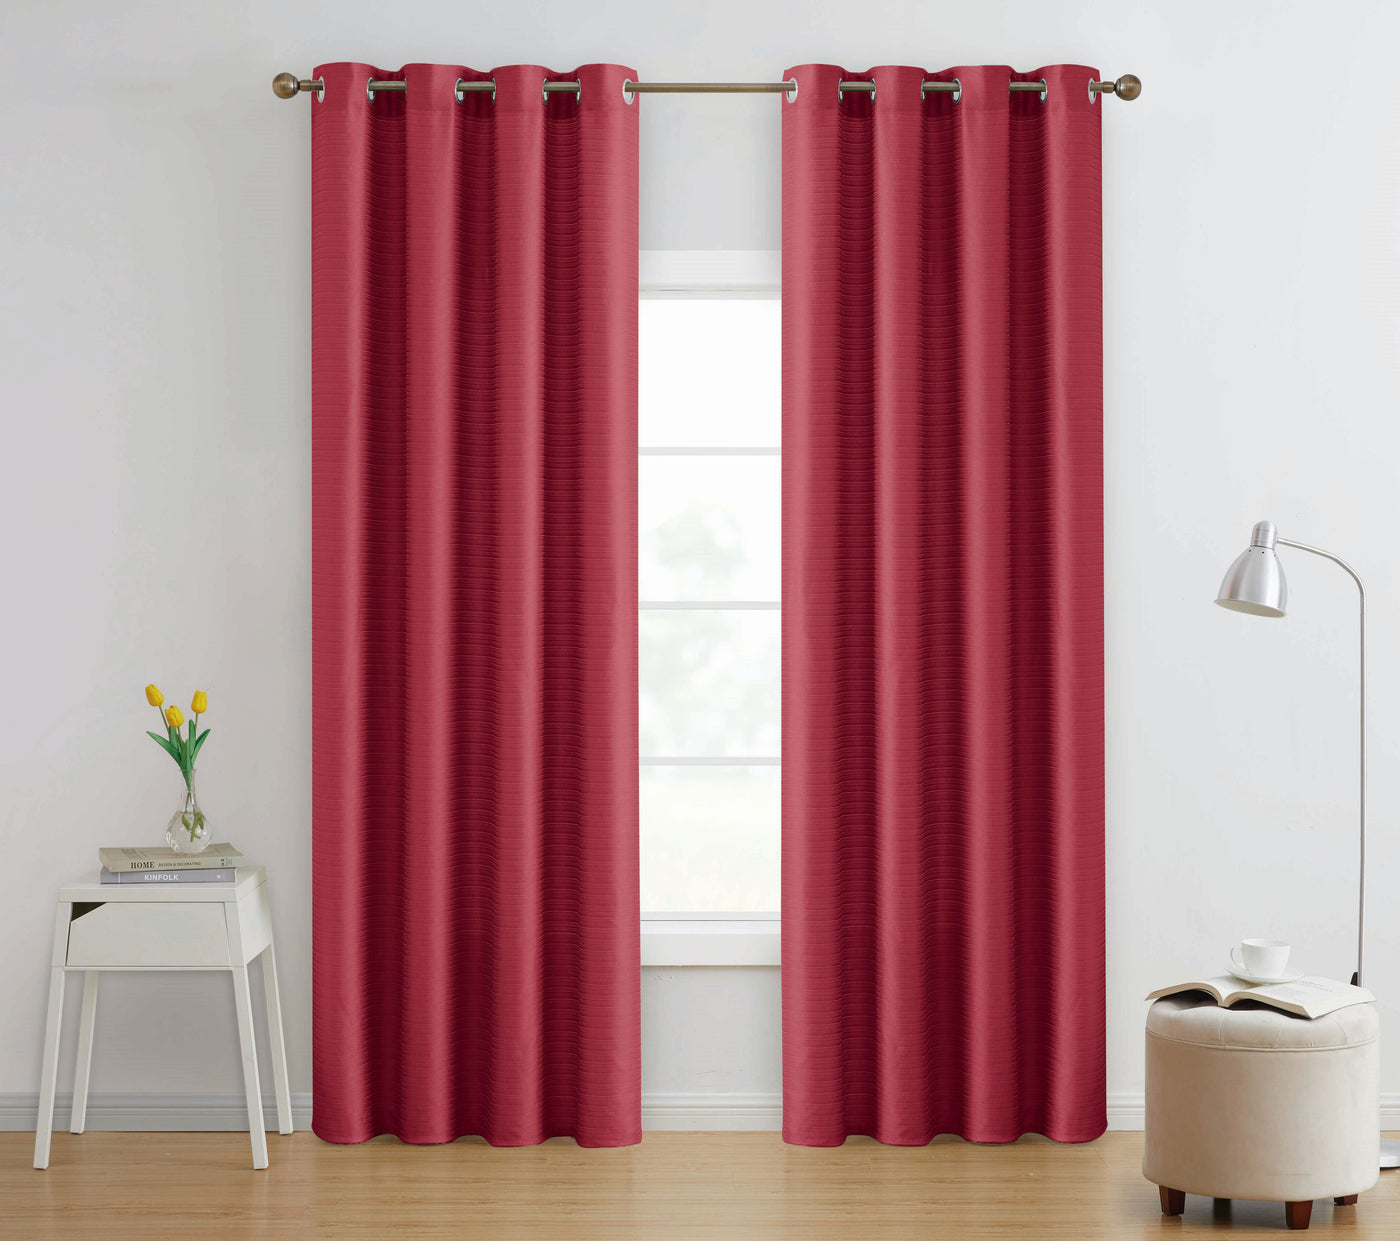 JACQUARD WINDOW CURTAIN WITH 8 GROMMETS BT563